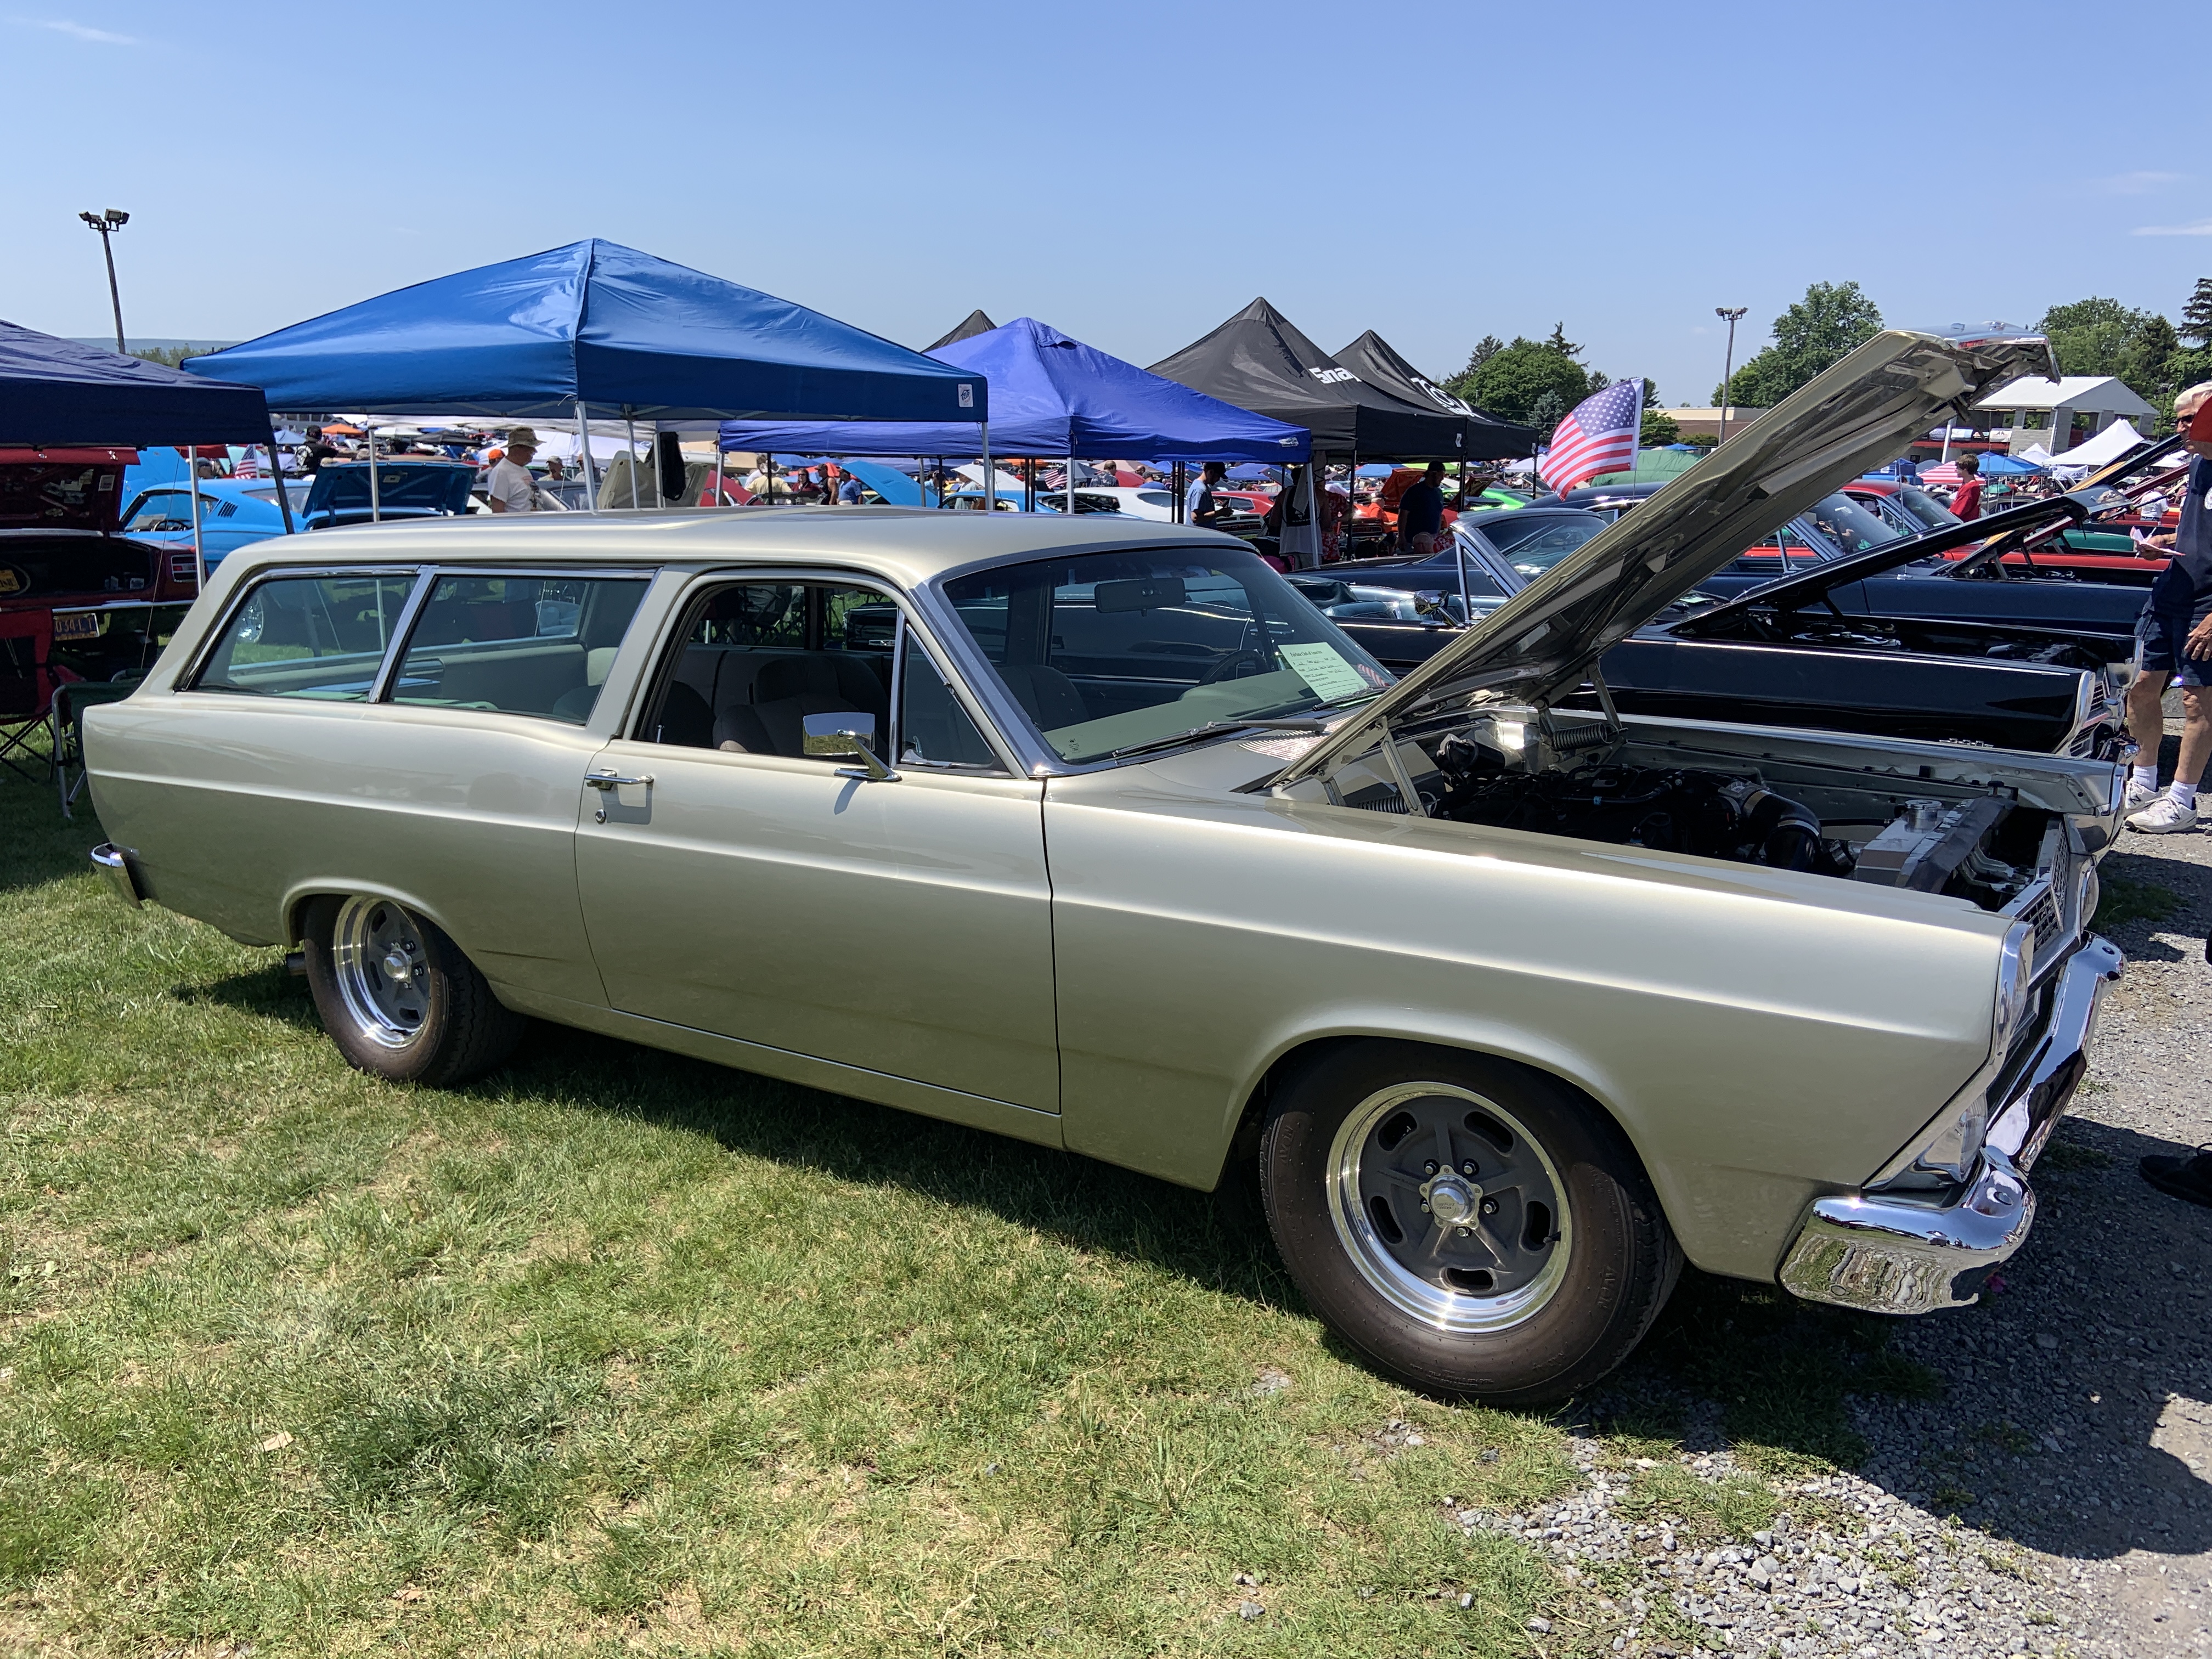 Photo Blast: More Epic Fords From The 2021 Carlisle Ford Nationals